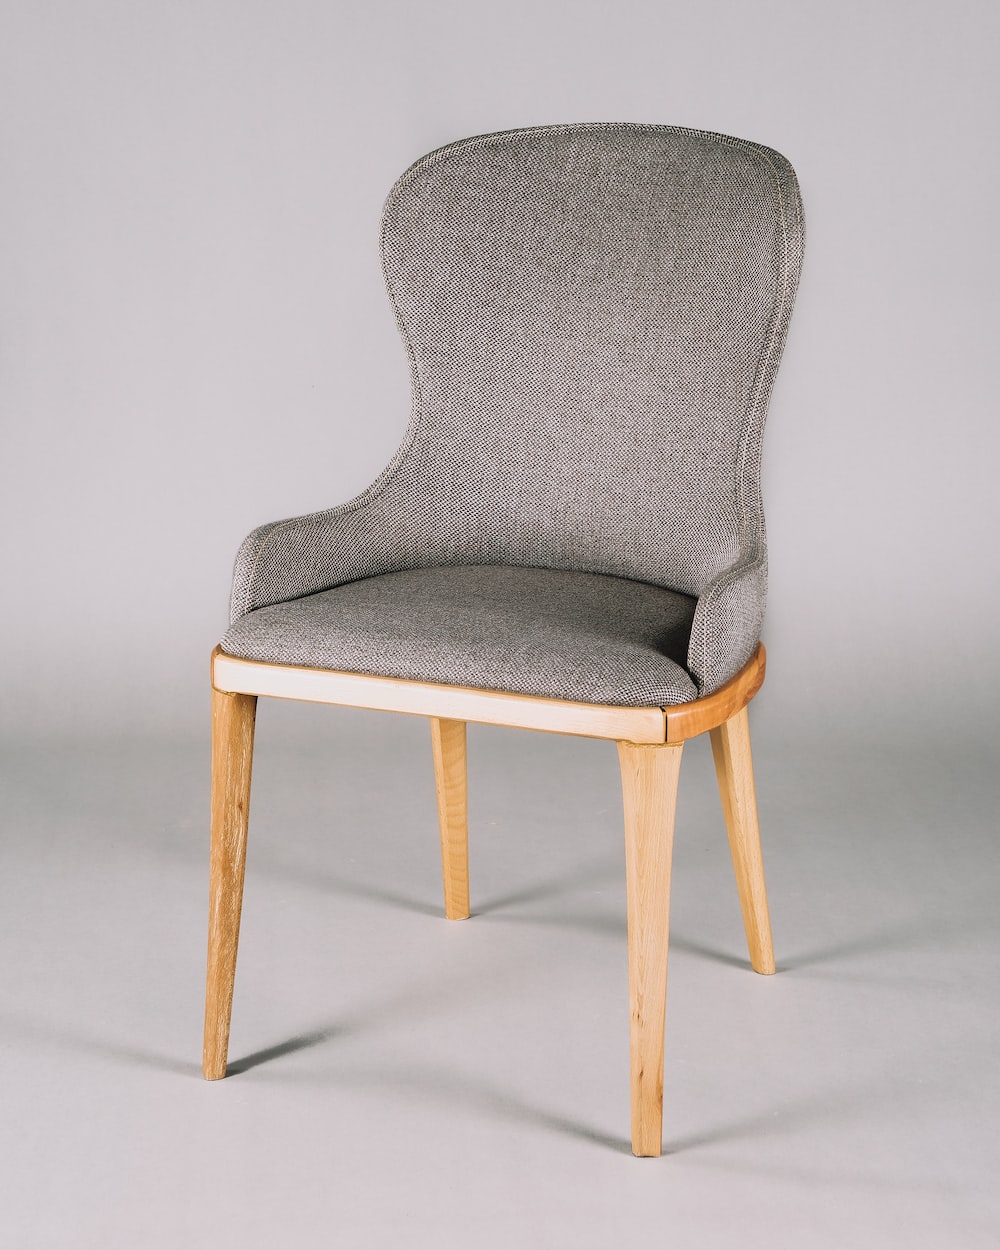 What is a chair made of?